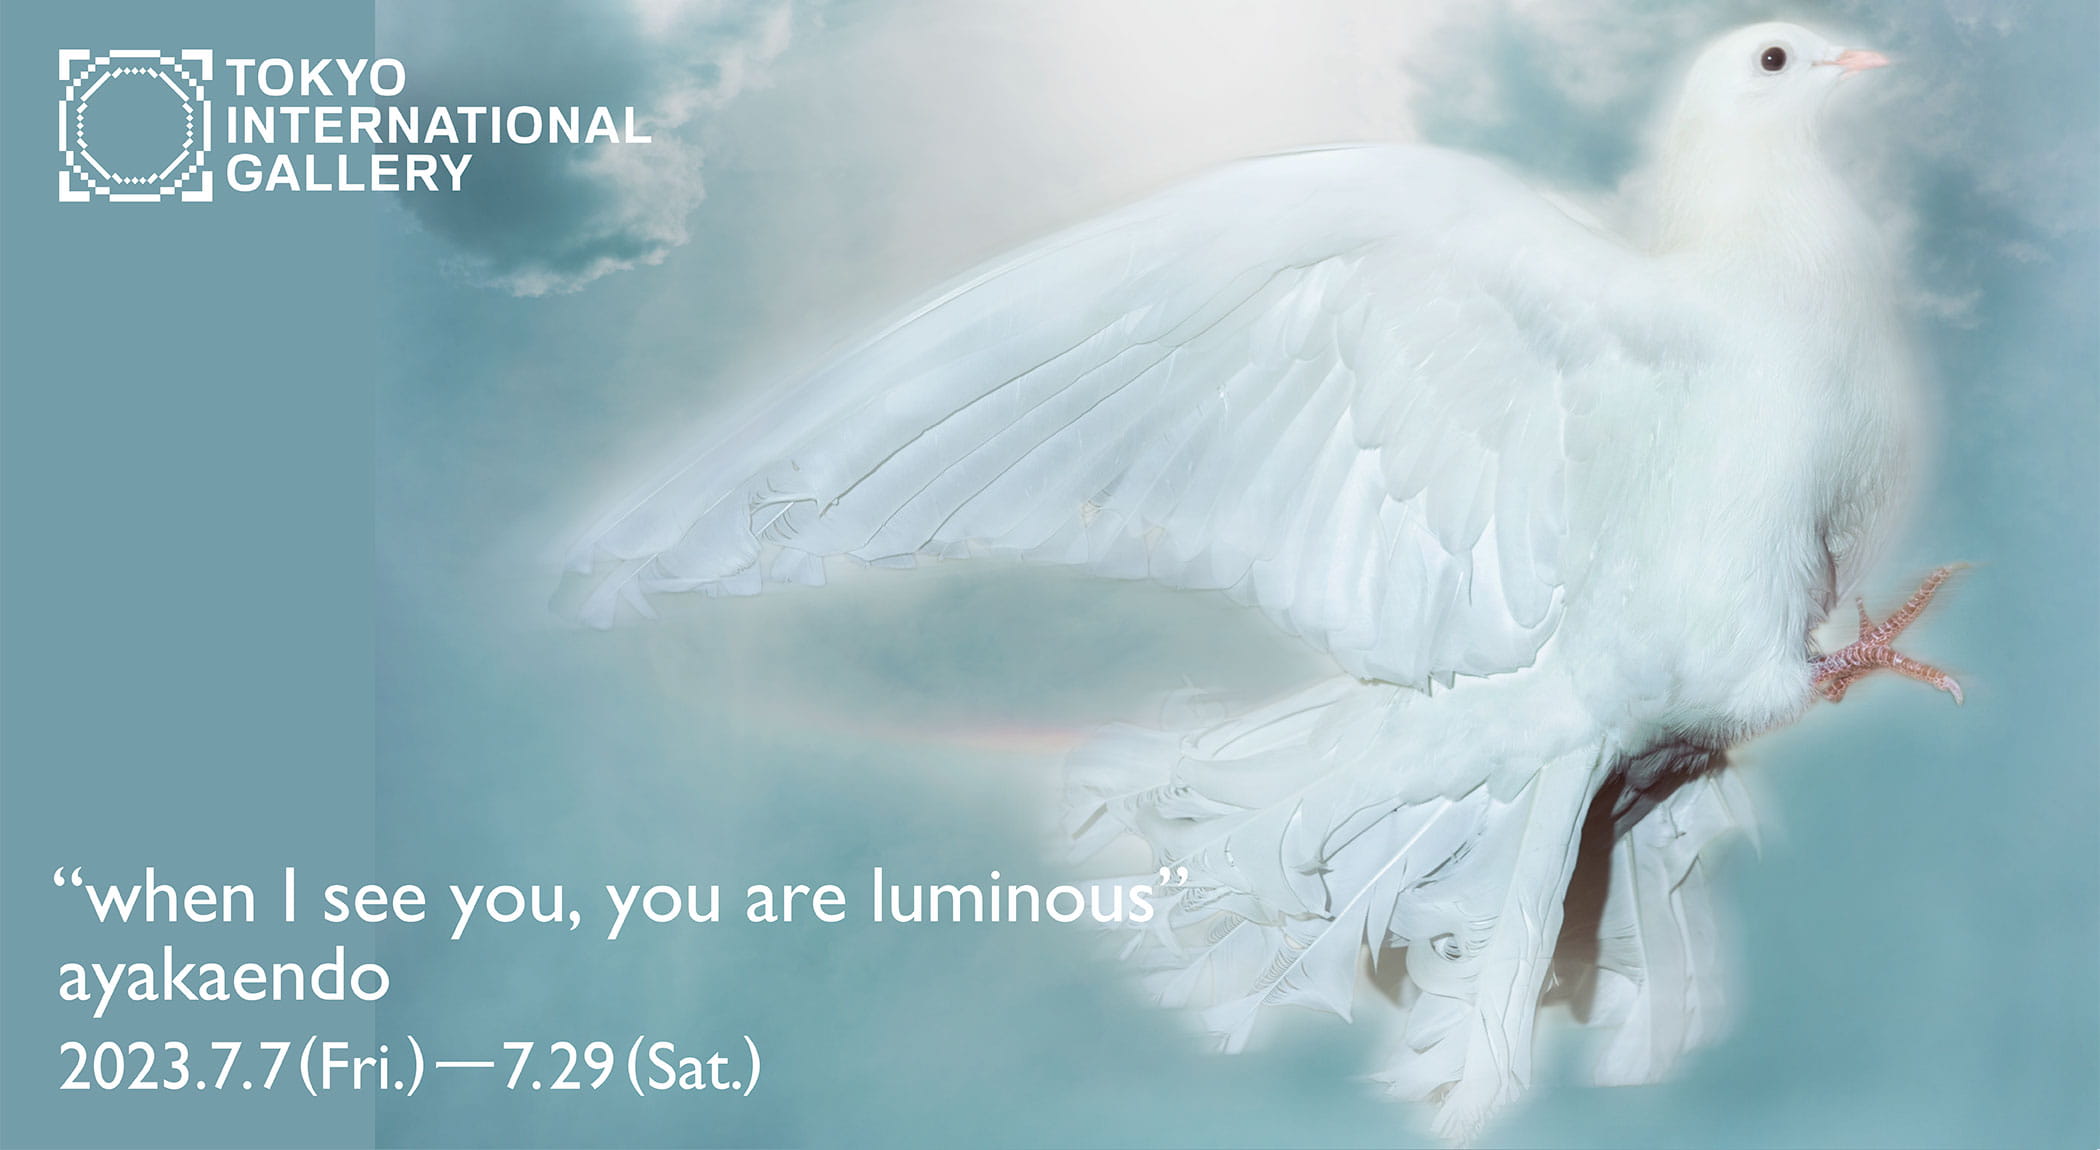 ”when I see you, you are luminous”